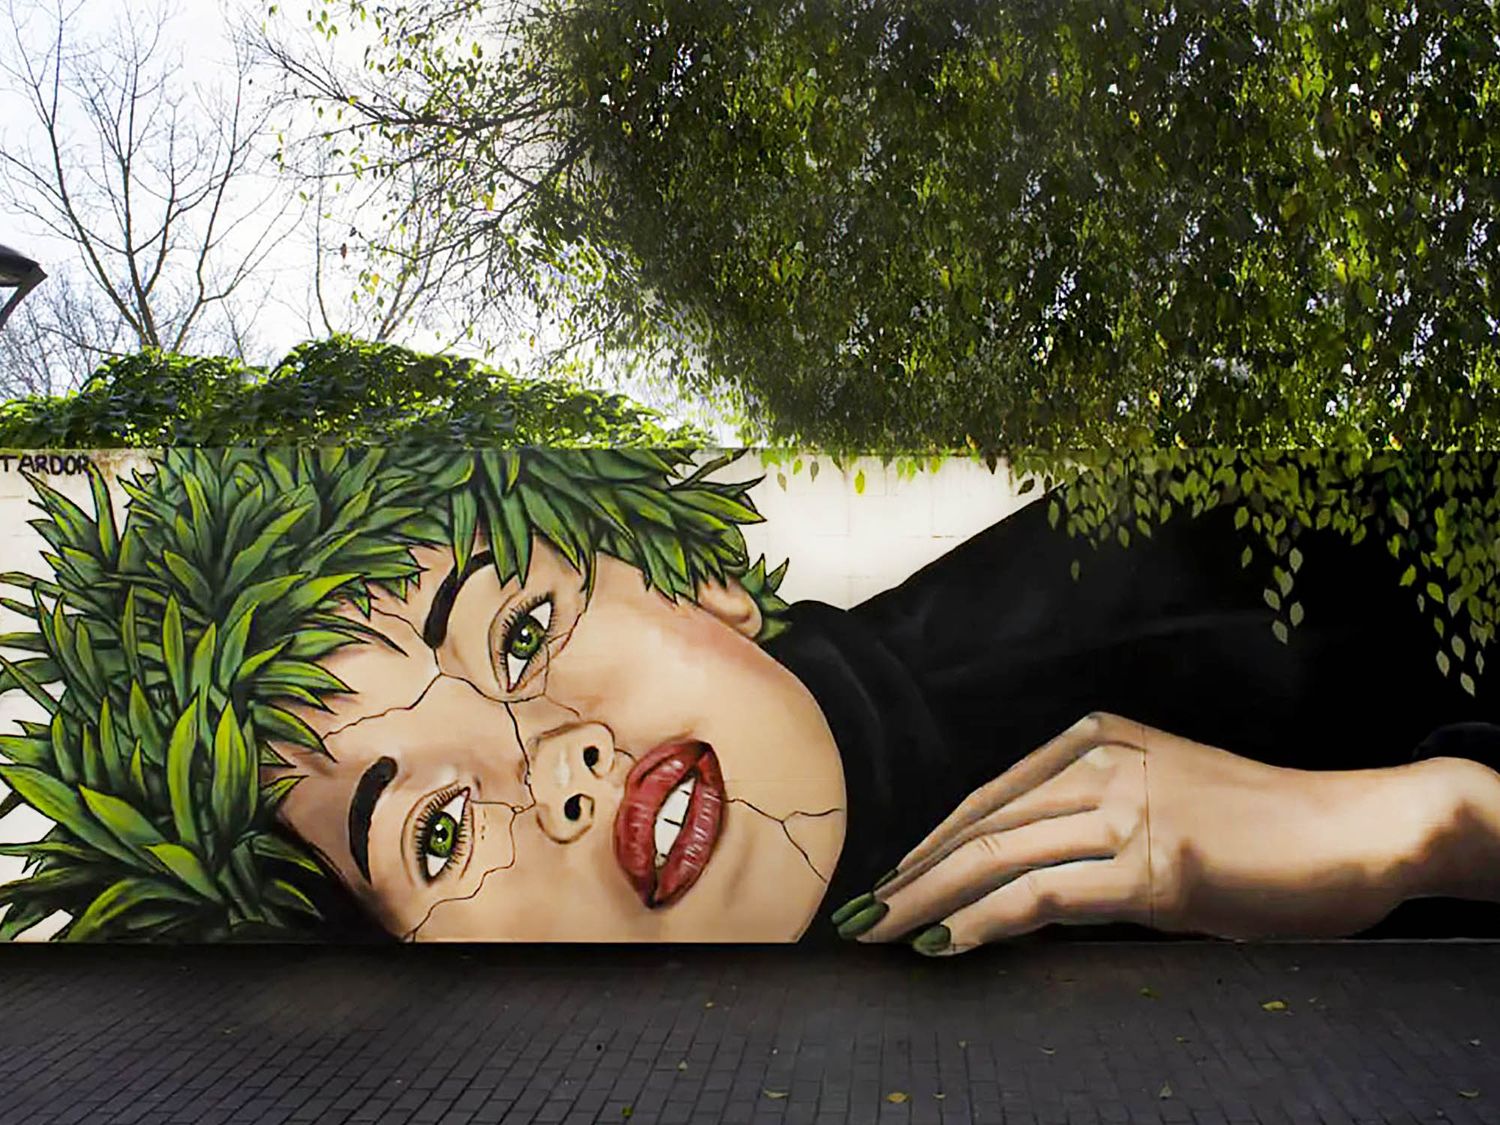 Entitled “Fortaleza”, the mural from the street artist Tardor was made for the Urbajove event at the exterior of the Torrecremada park as an ode to children and teenagers (©Tardor)